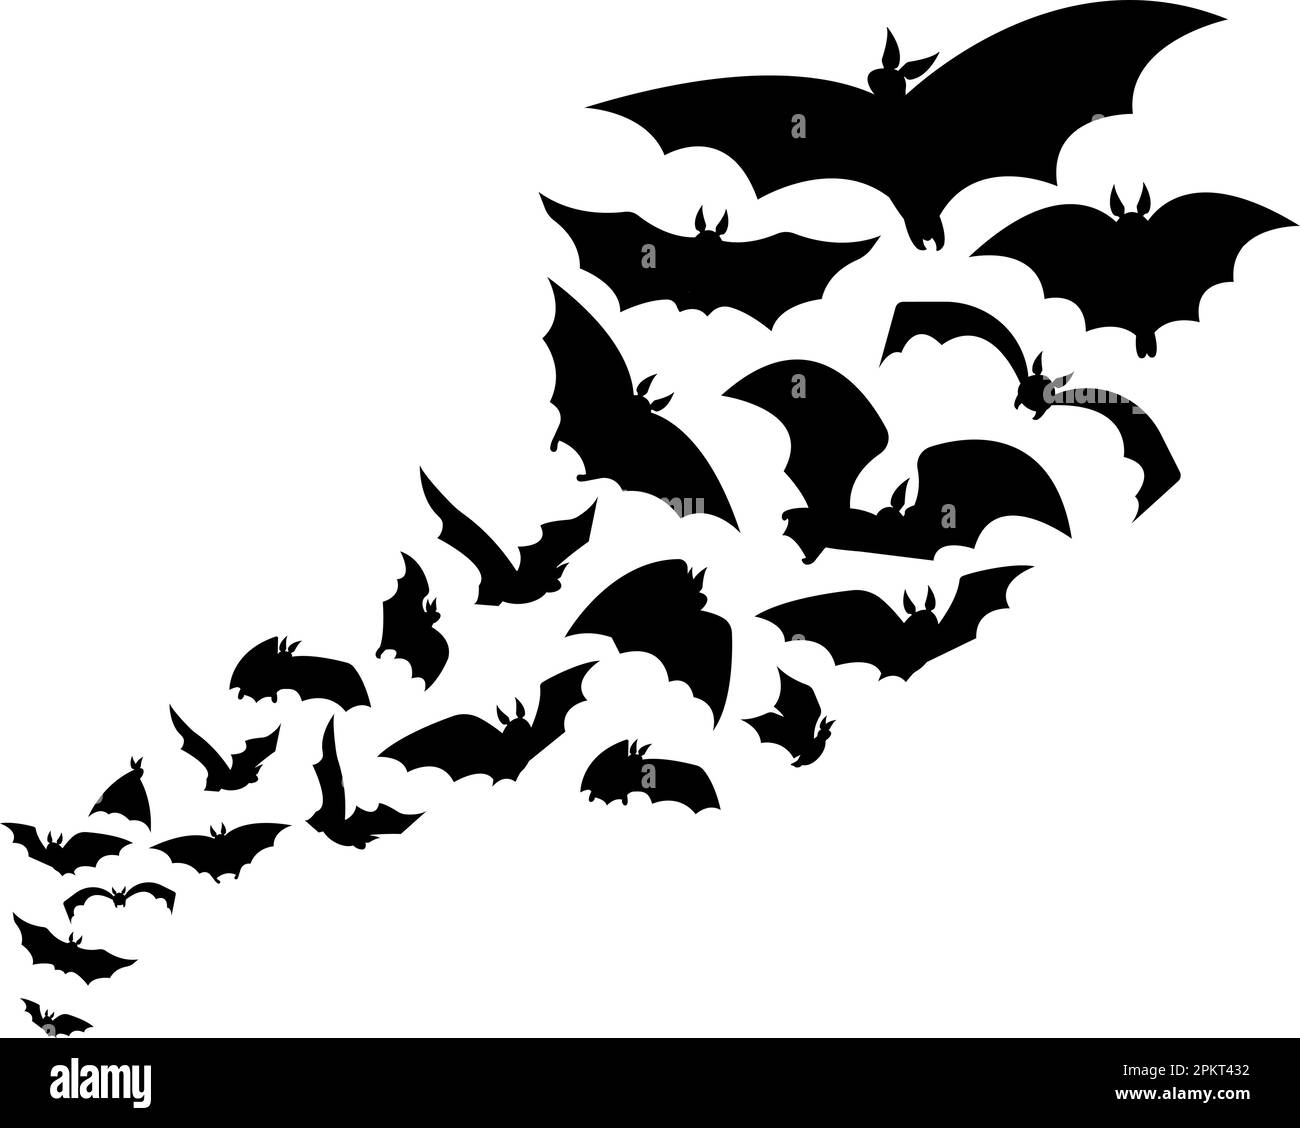 Halloween flying swarm bats, horror silhouette scary graphic. Animal vampires, isolated black gothic creepy creature. Mystical night decent vector Stock Vector